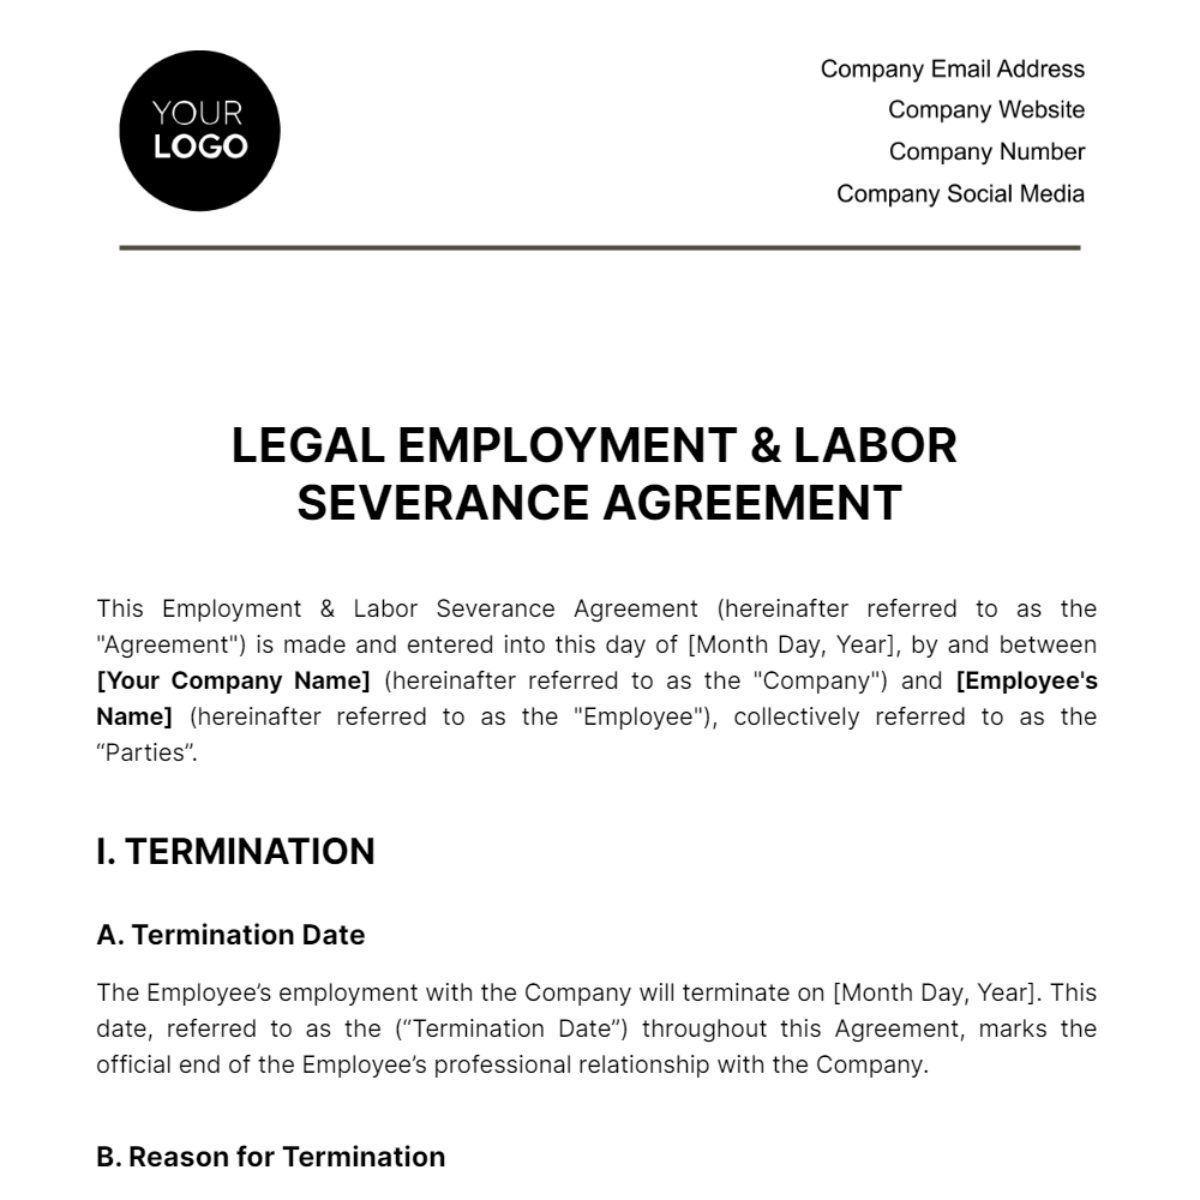 Free Legal Employment & Labor Severance Agreement Template